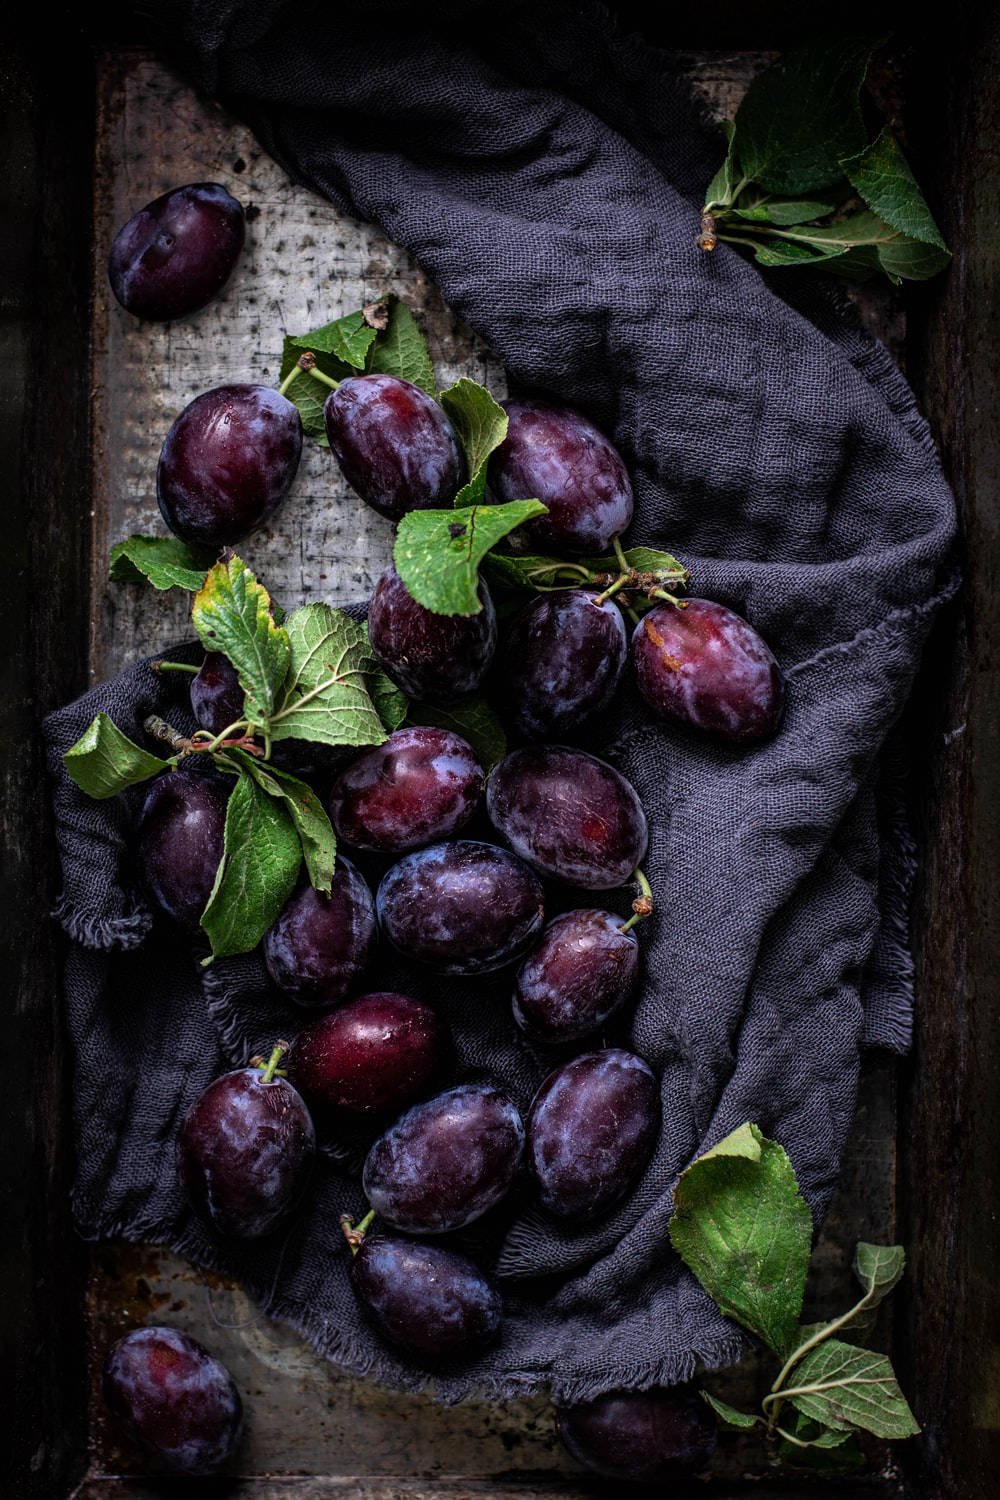 Plommonmed Djupt Lila Skinn. (this Could Be A Possible Description For A Wallpaper Featuring Plum Fruits With Deep Violet Skins.) Wallpaper